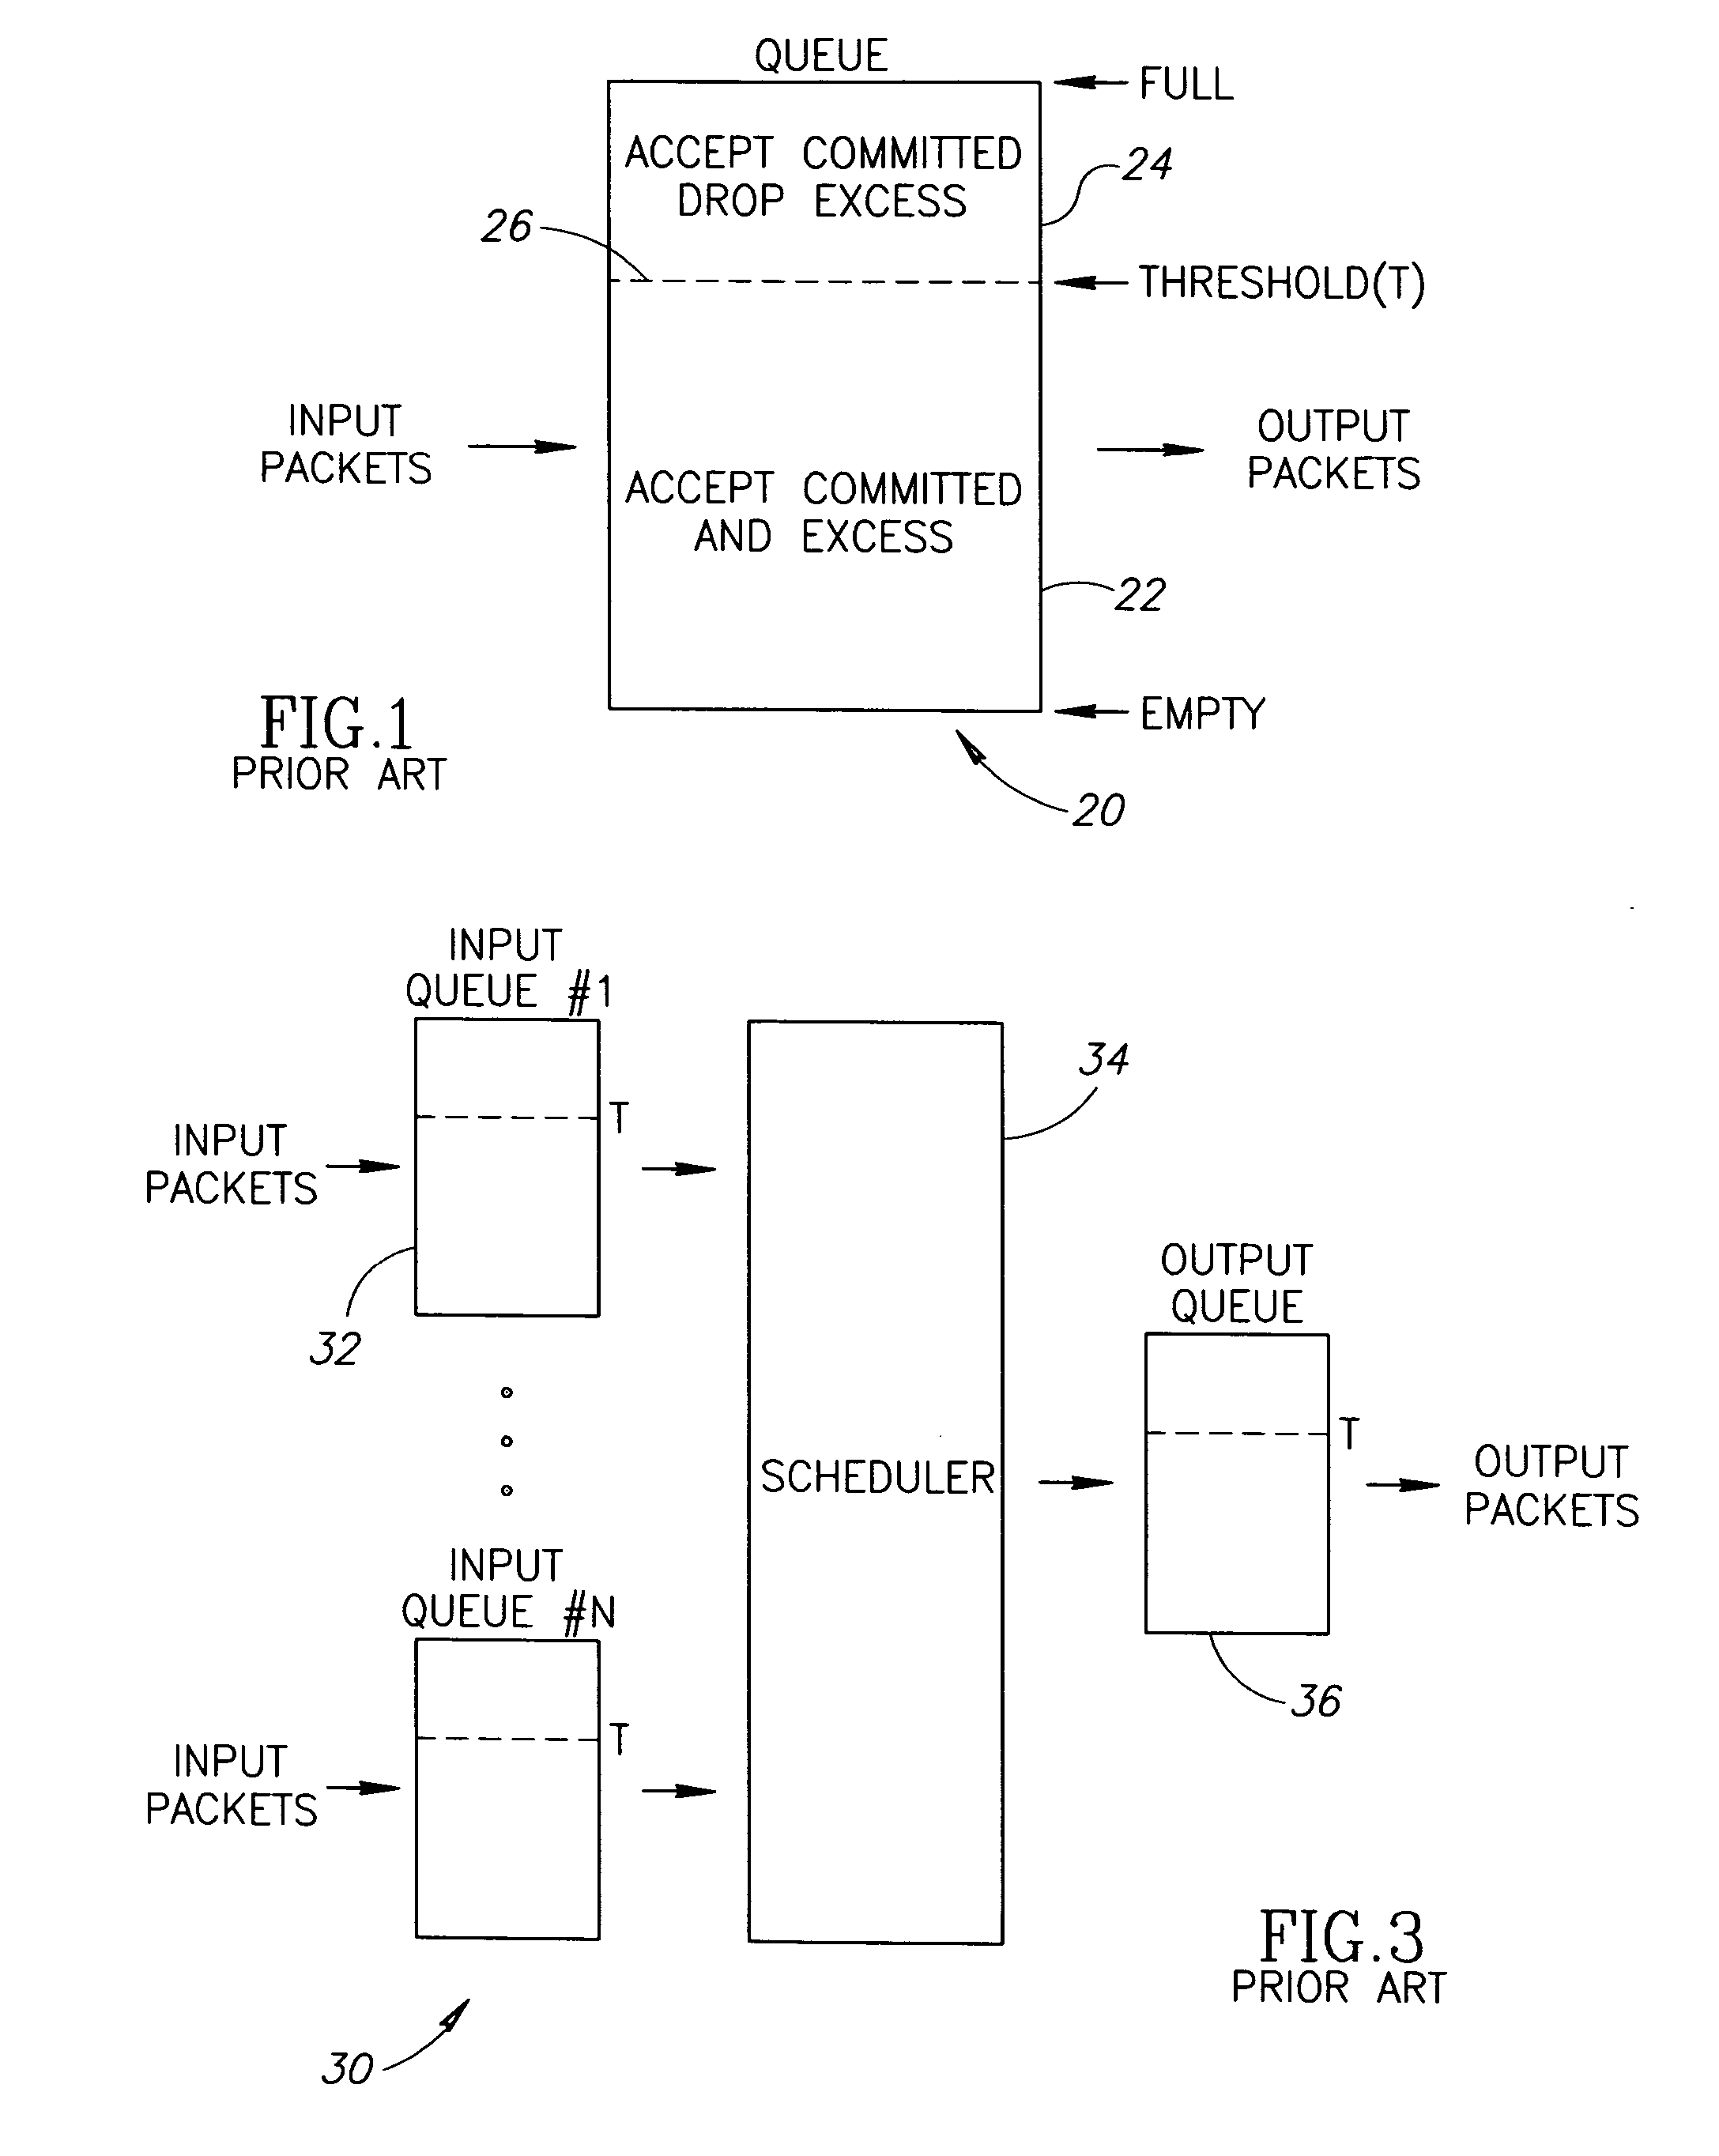 Apparatus for and method of support for committed over excess traffic in a distributed queuing system